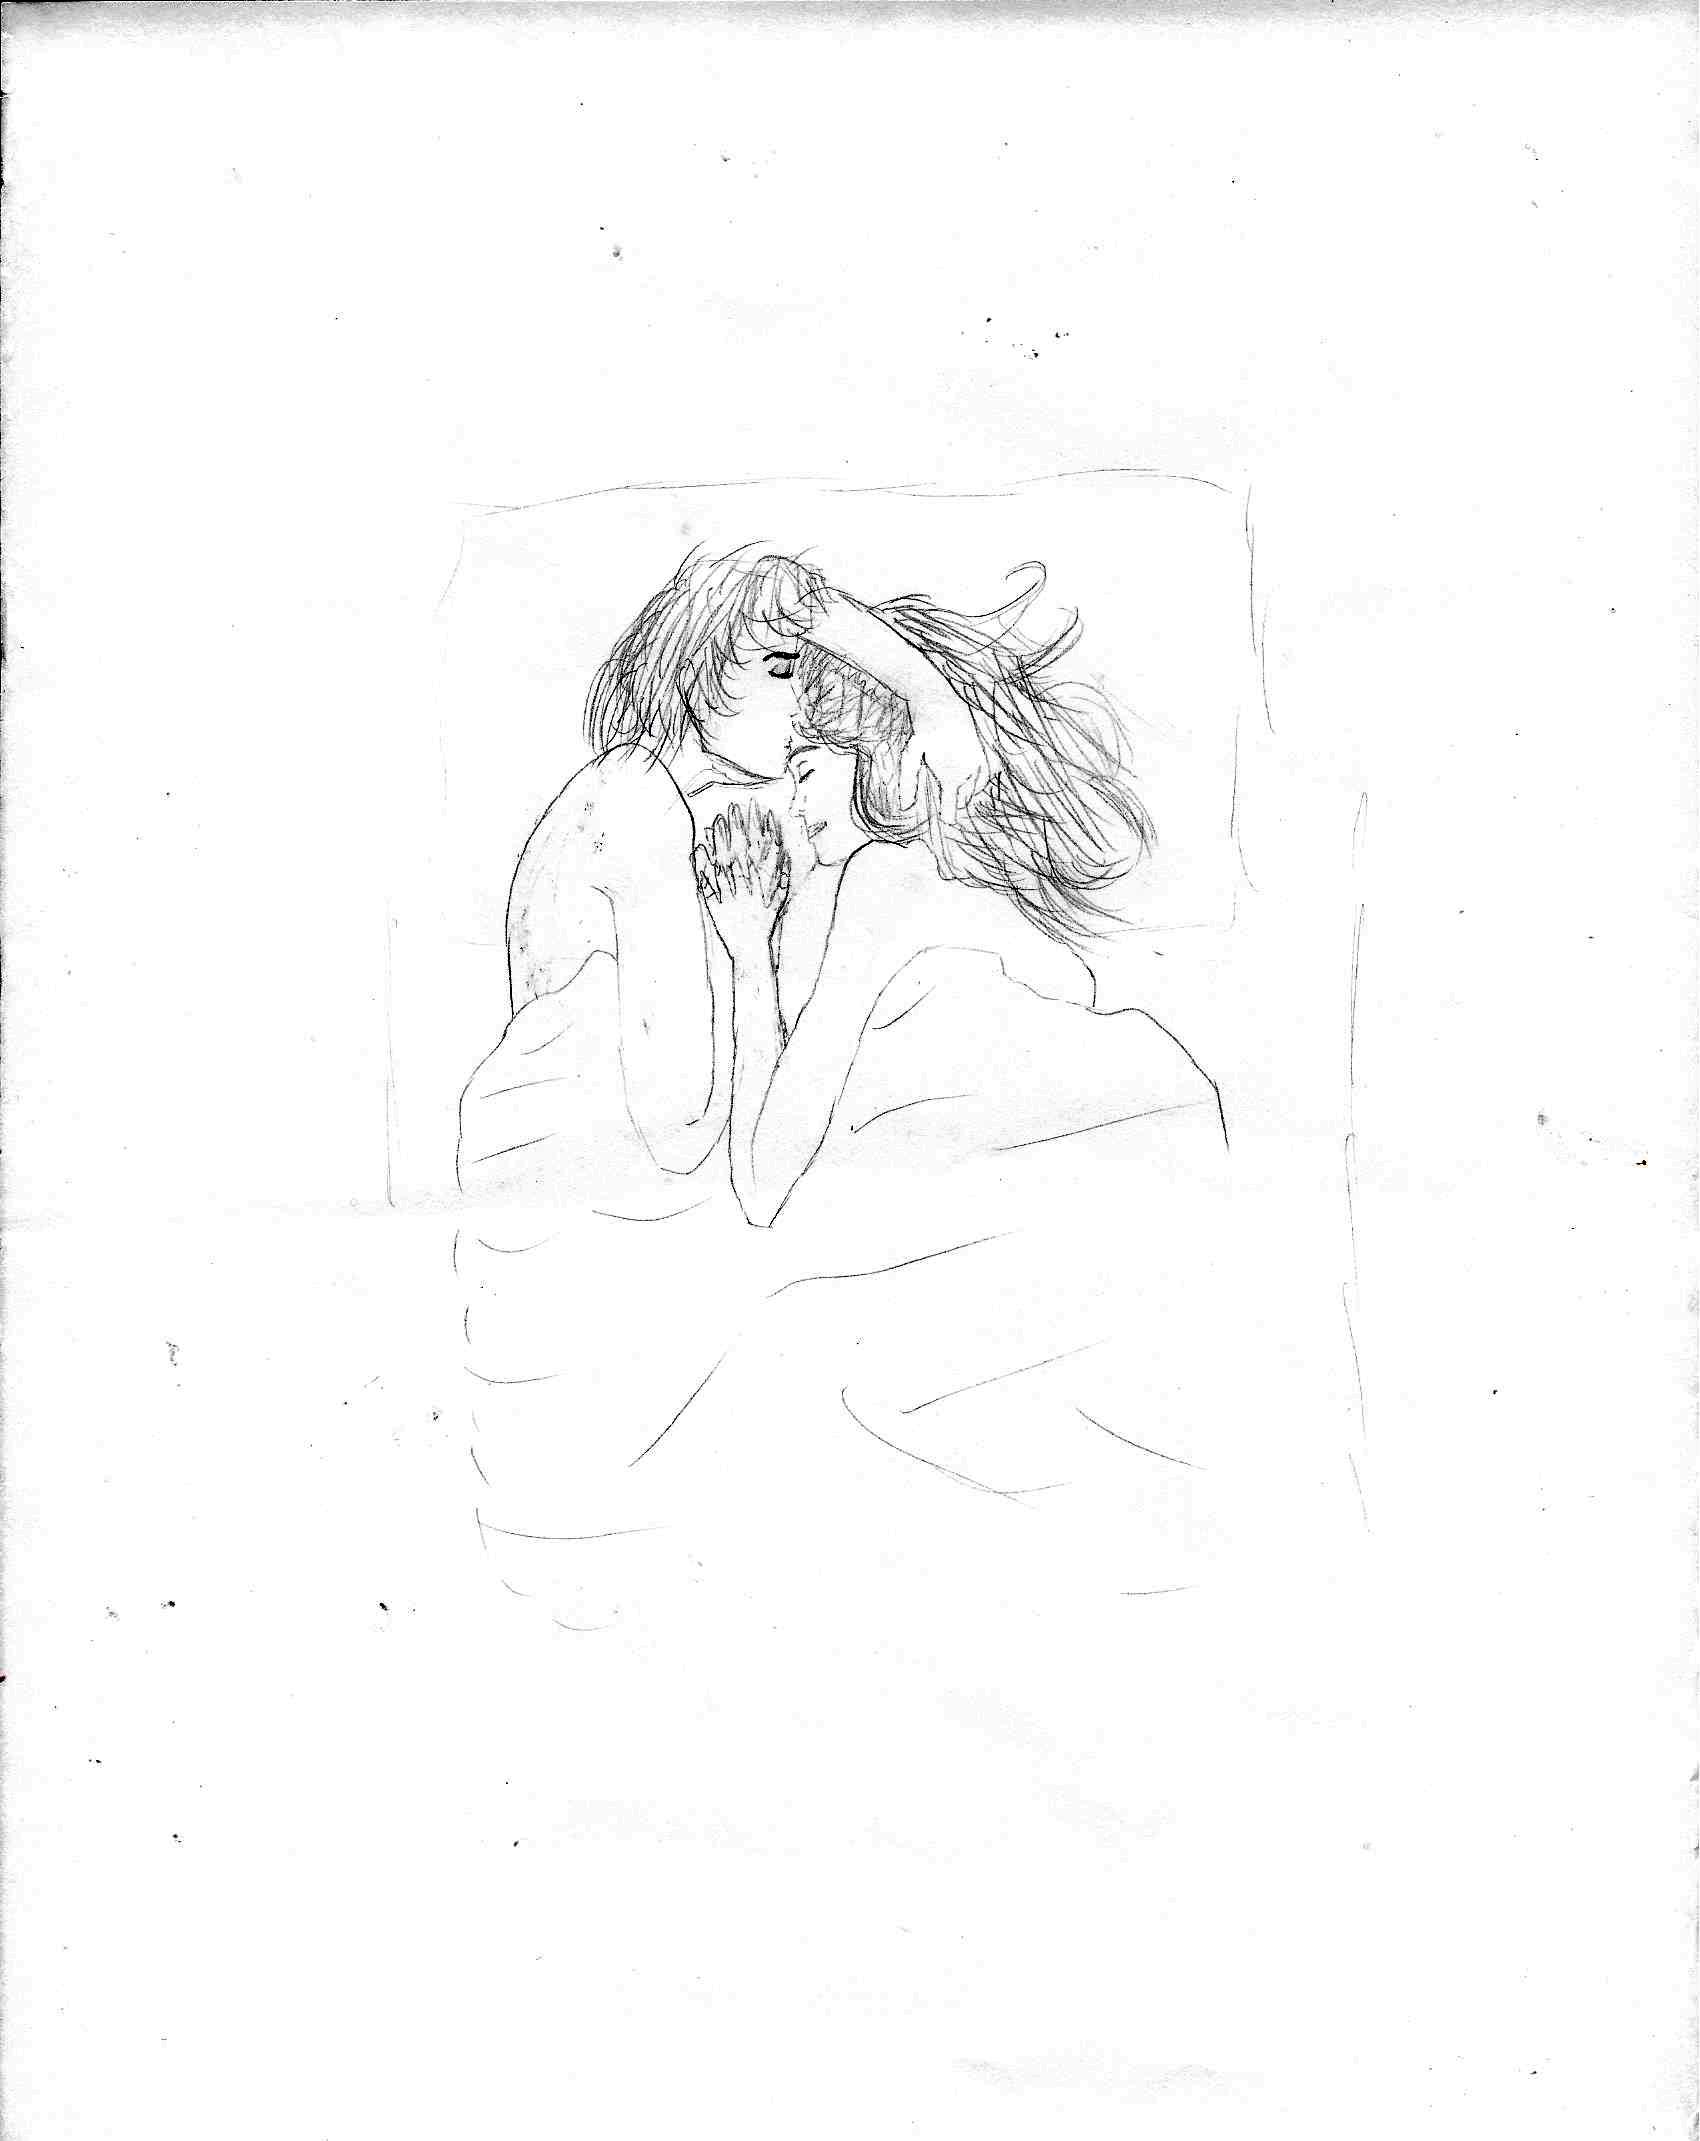 Couple Laying Together by Blink719 on DeviantArt